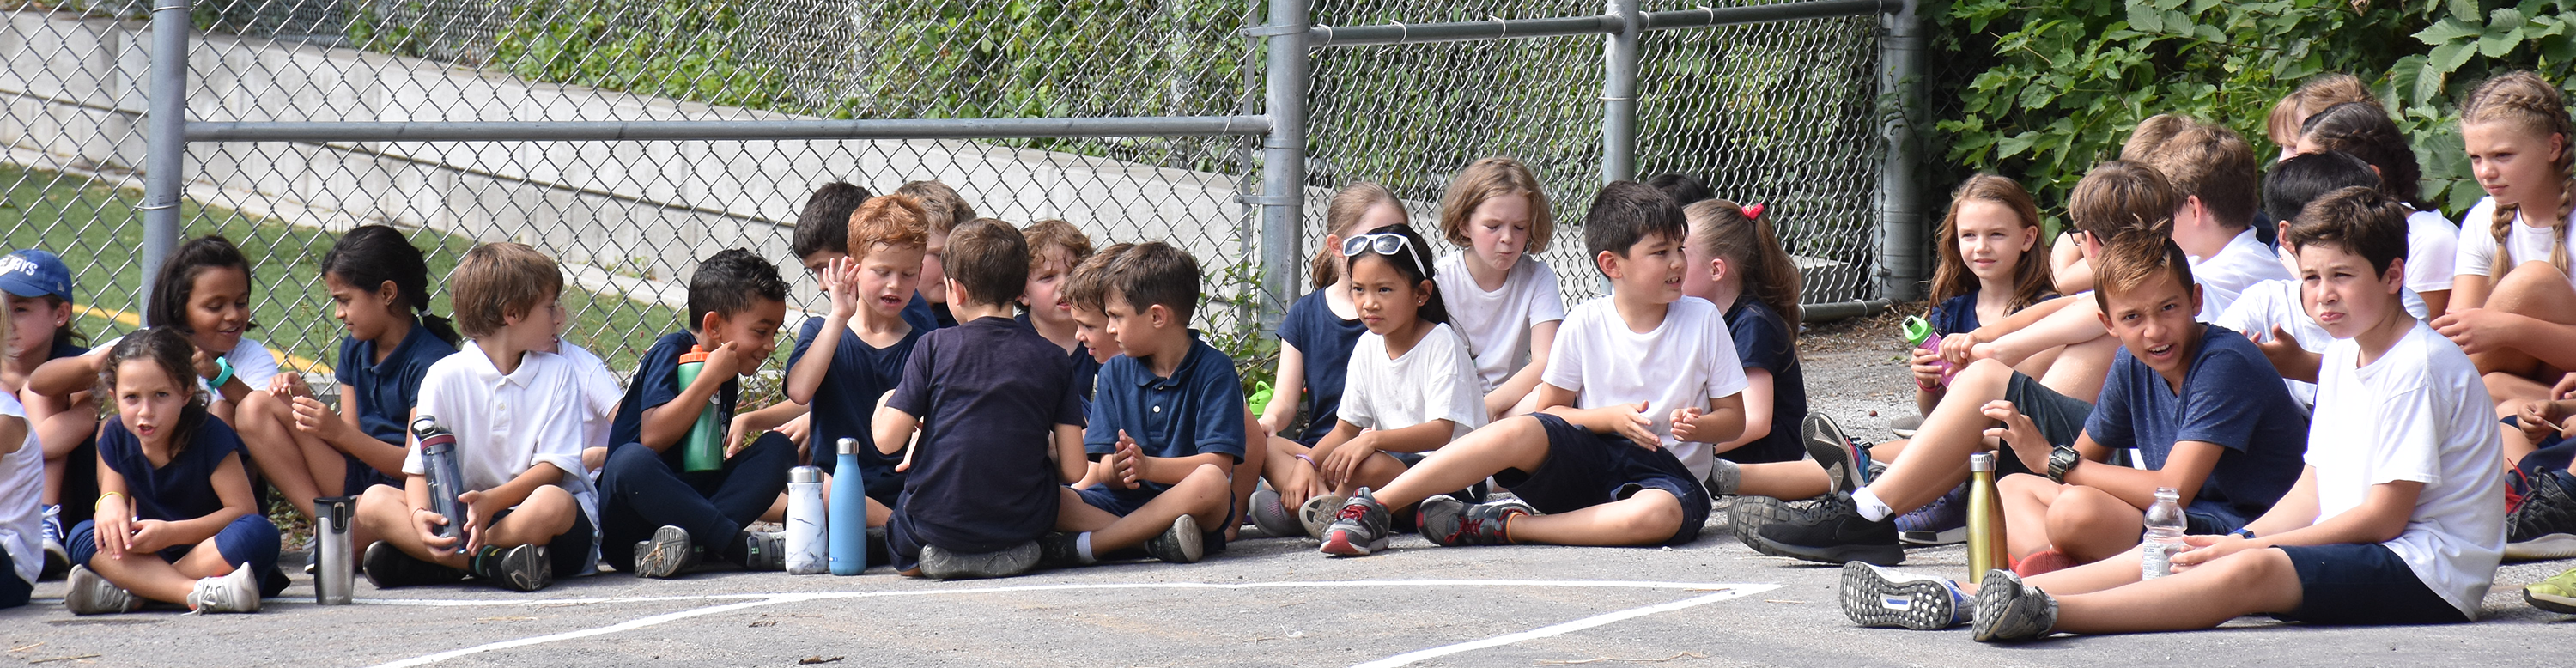 Blessed Sacrament students in uniform sitting in the new playground courtyard.